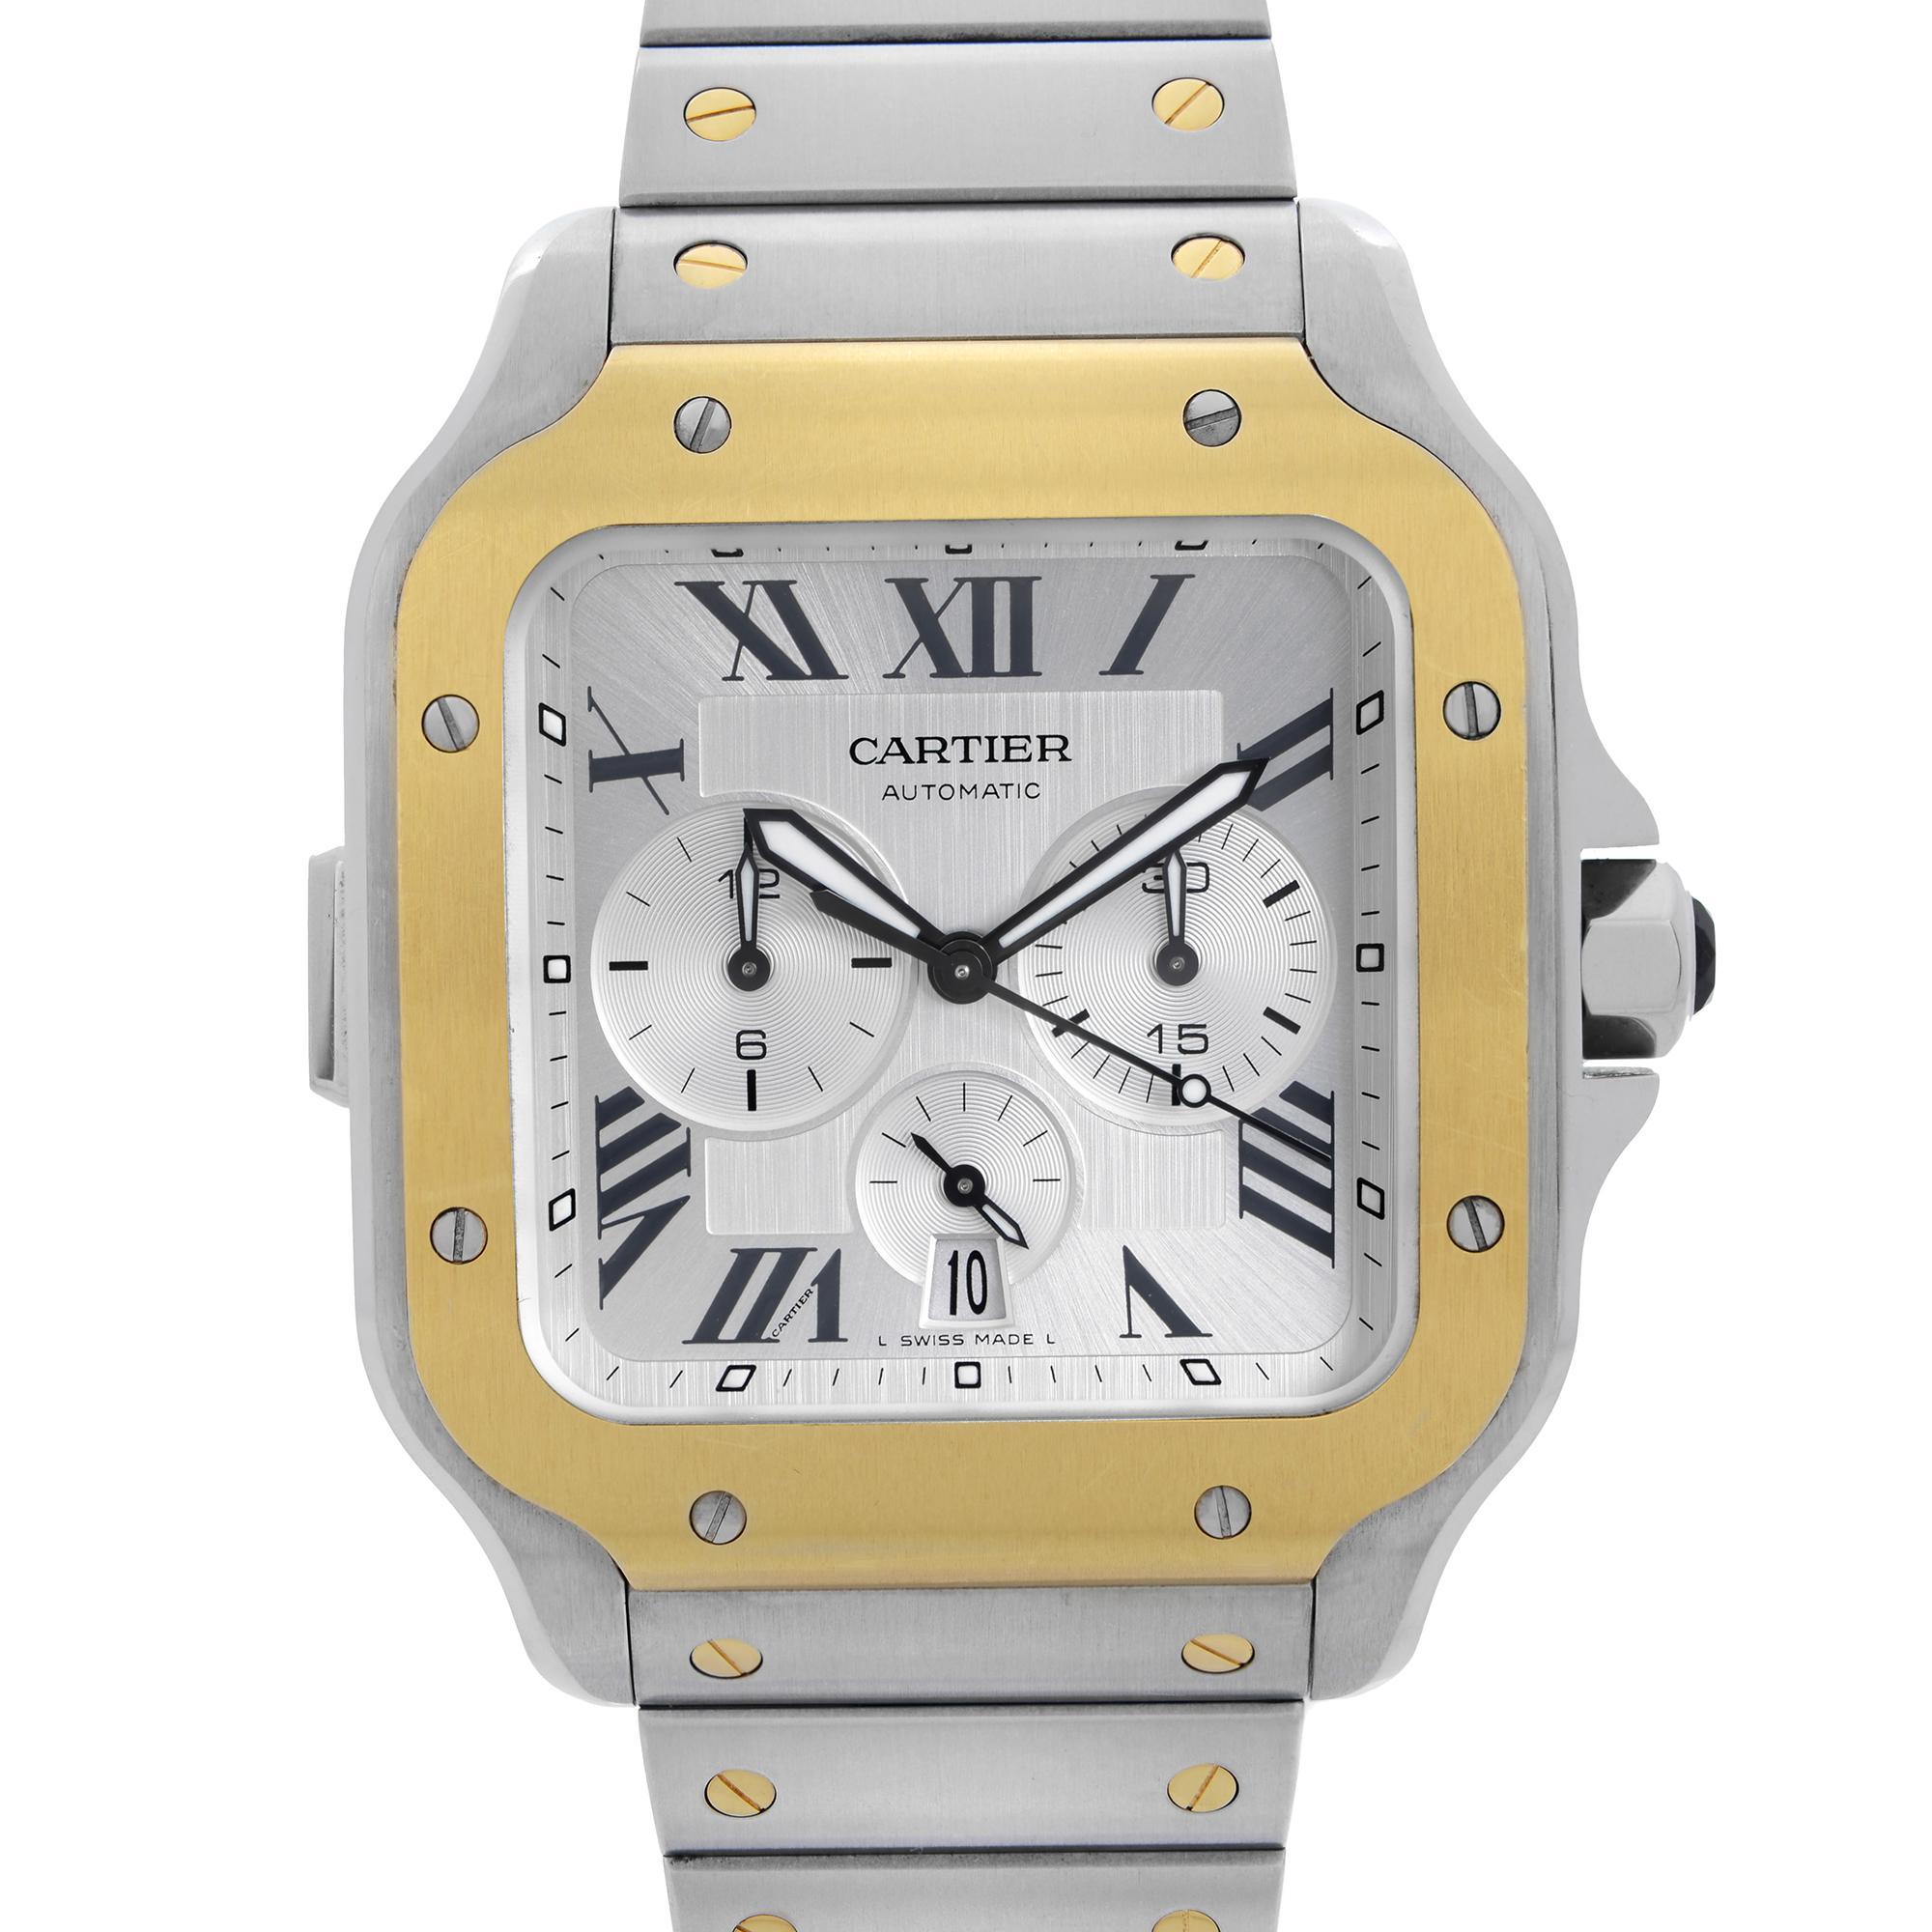 Display Model Cartier Santos 43.3mm Automatic Men's Watch W2SA0008. Original Box and 2 Additional Rubber Straps and Leather Straps are Included. This Beautiful Timepiece is Powered by an Mechanical (Automatic) Movement And Features: Stainless Steel